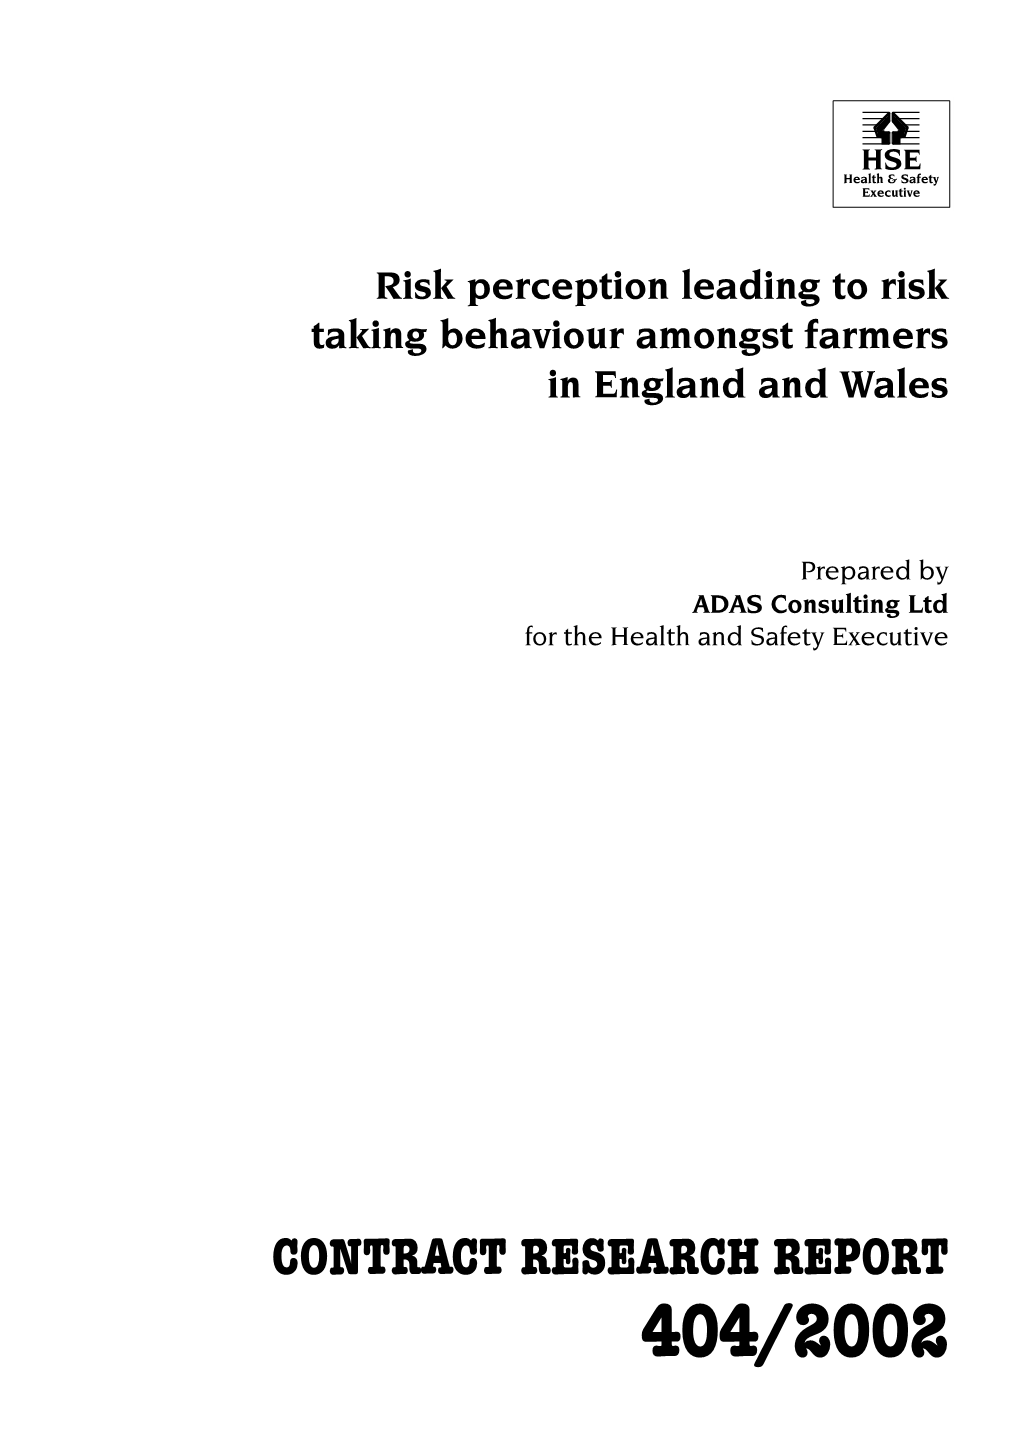 Risk Perception Leading to Risk Taking Behaviour Amongst Farmers in England and Wales